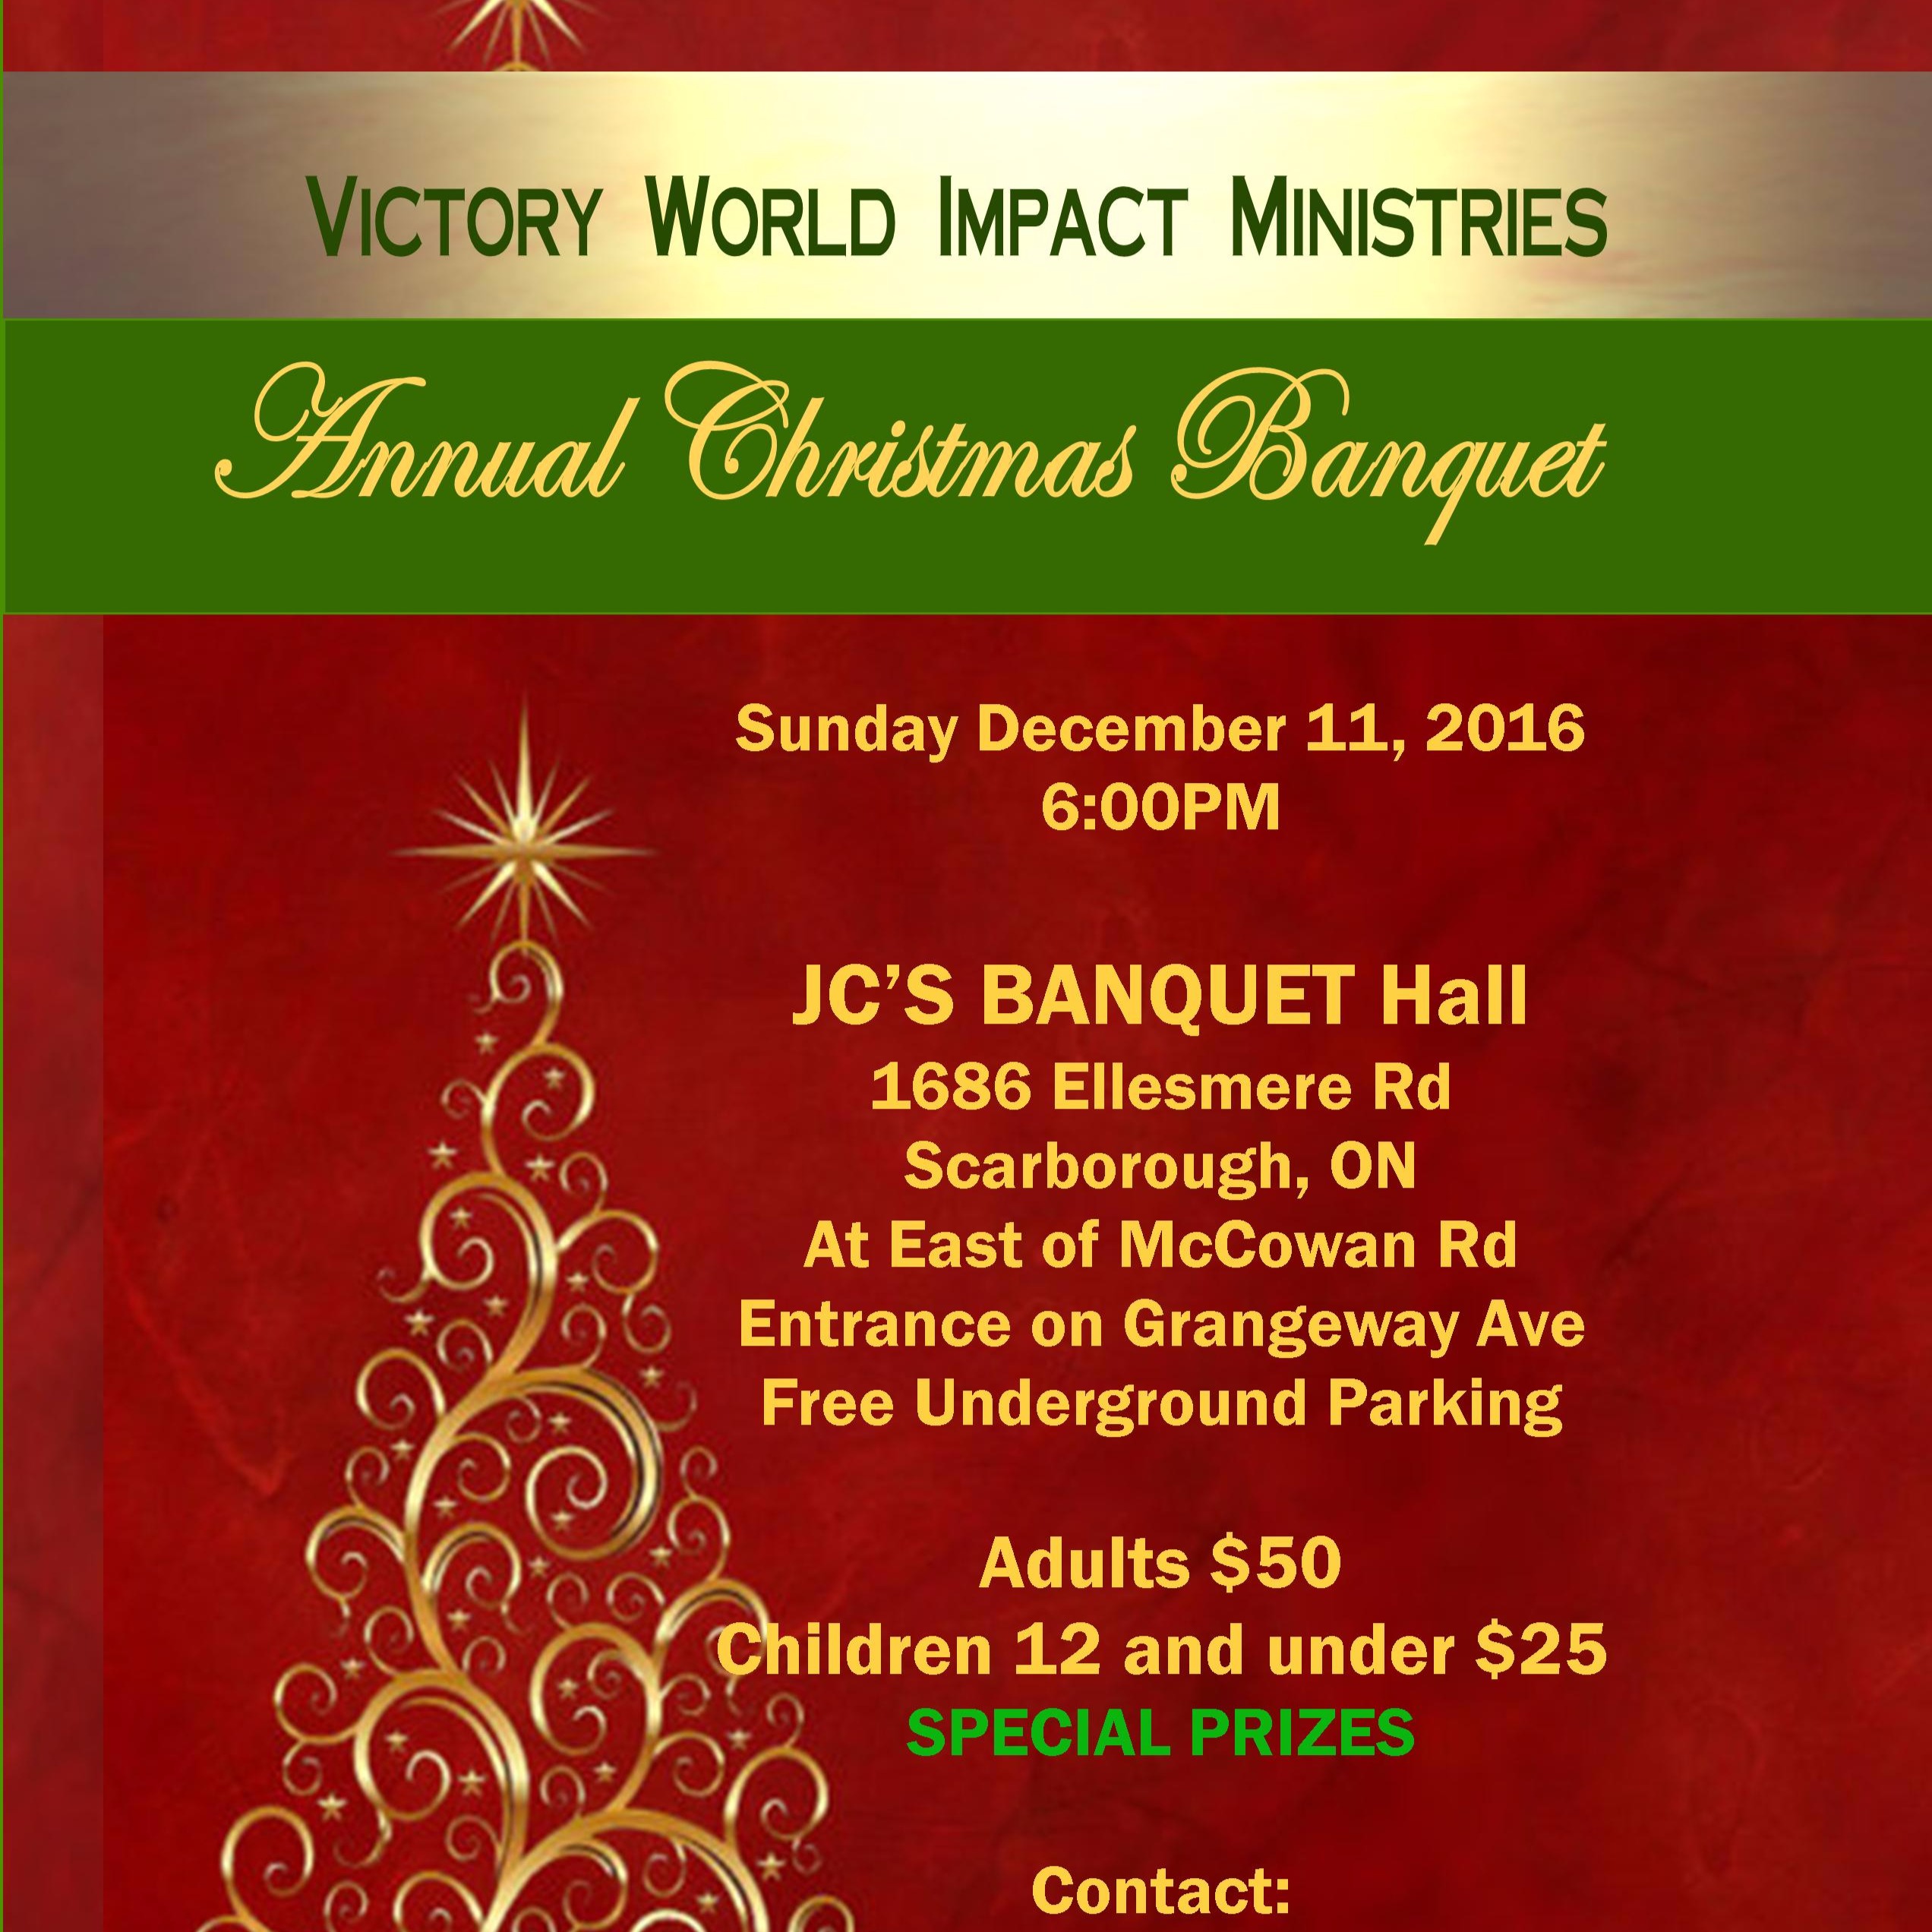 Victory World Impact Ministries Annual Christmas Banquet 